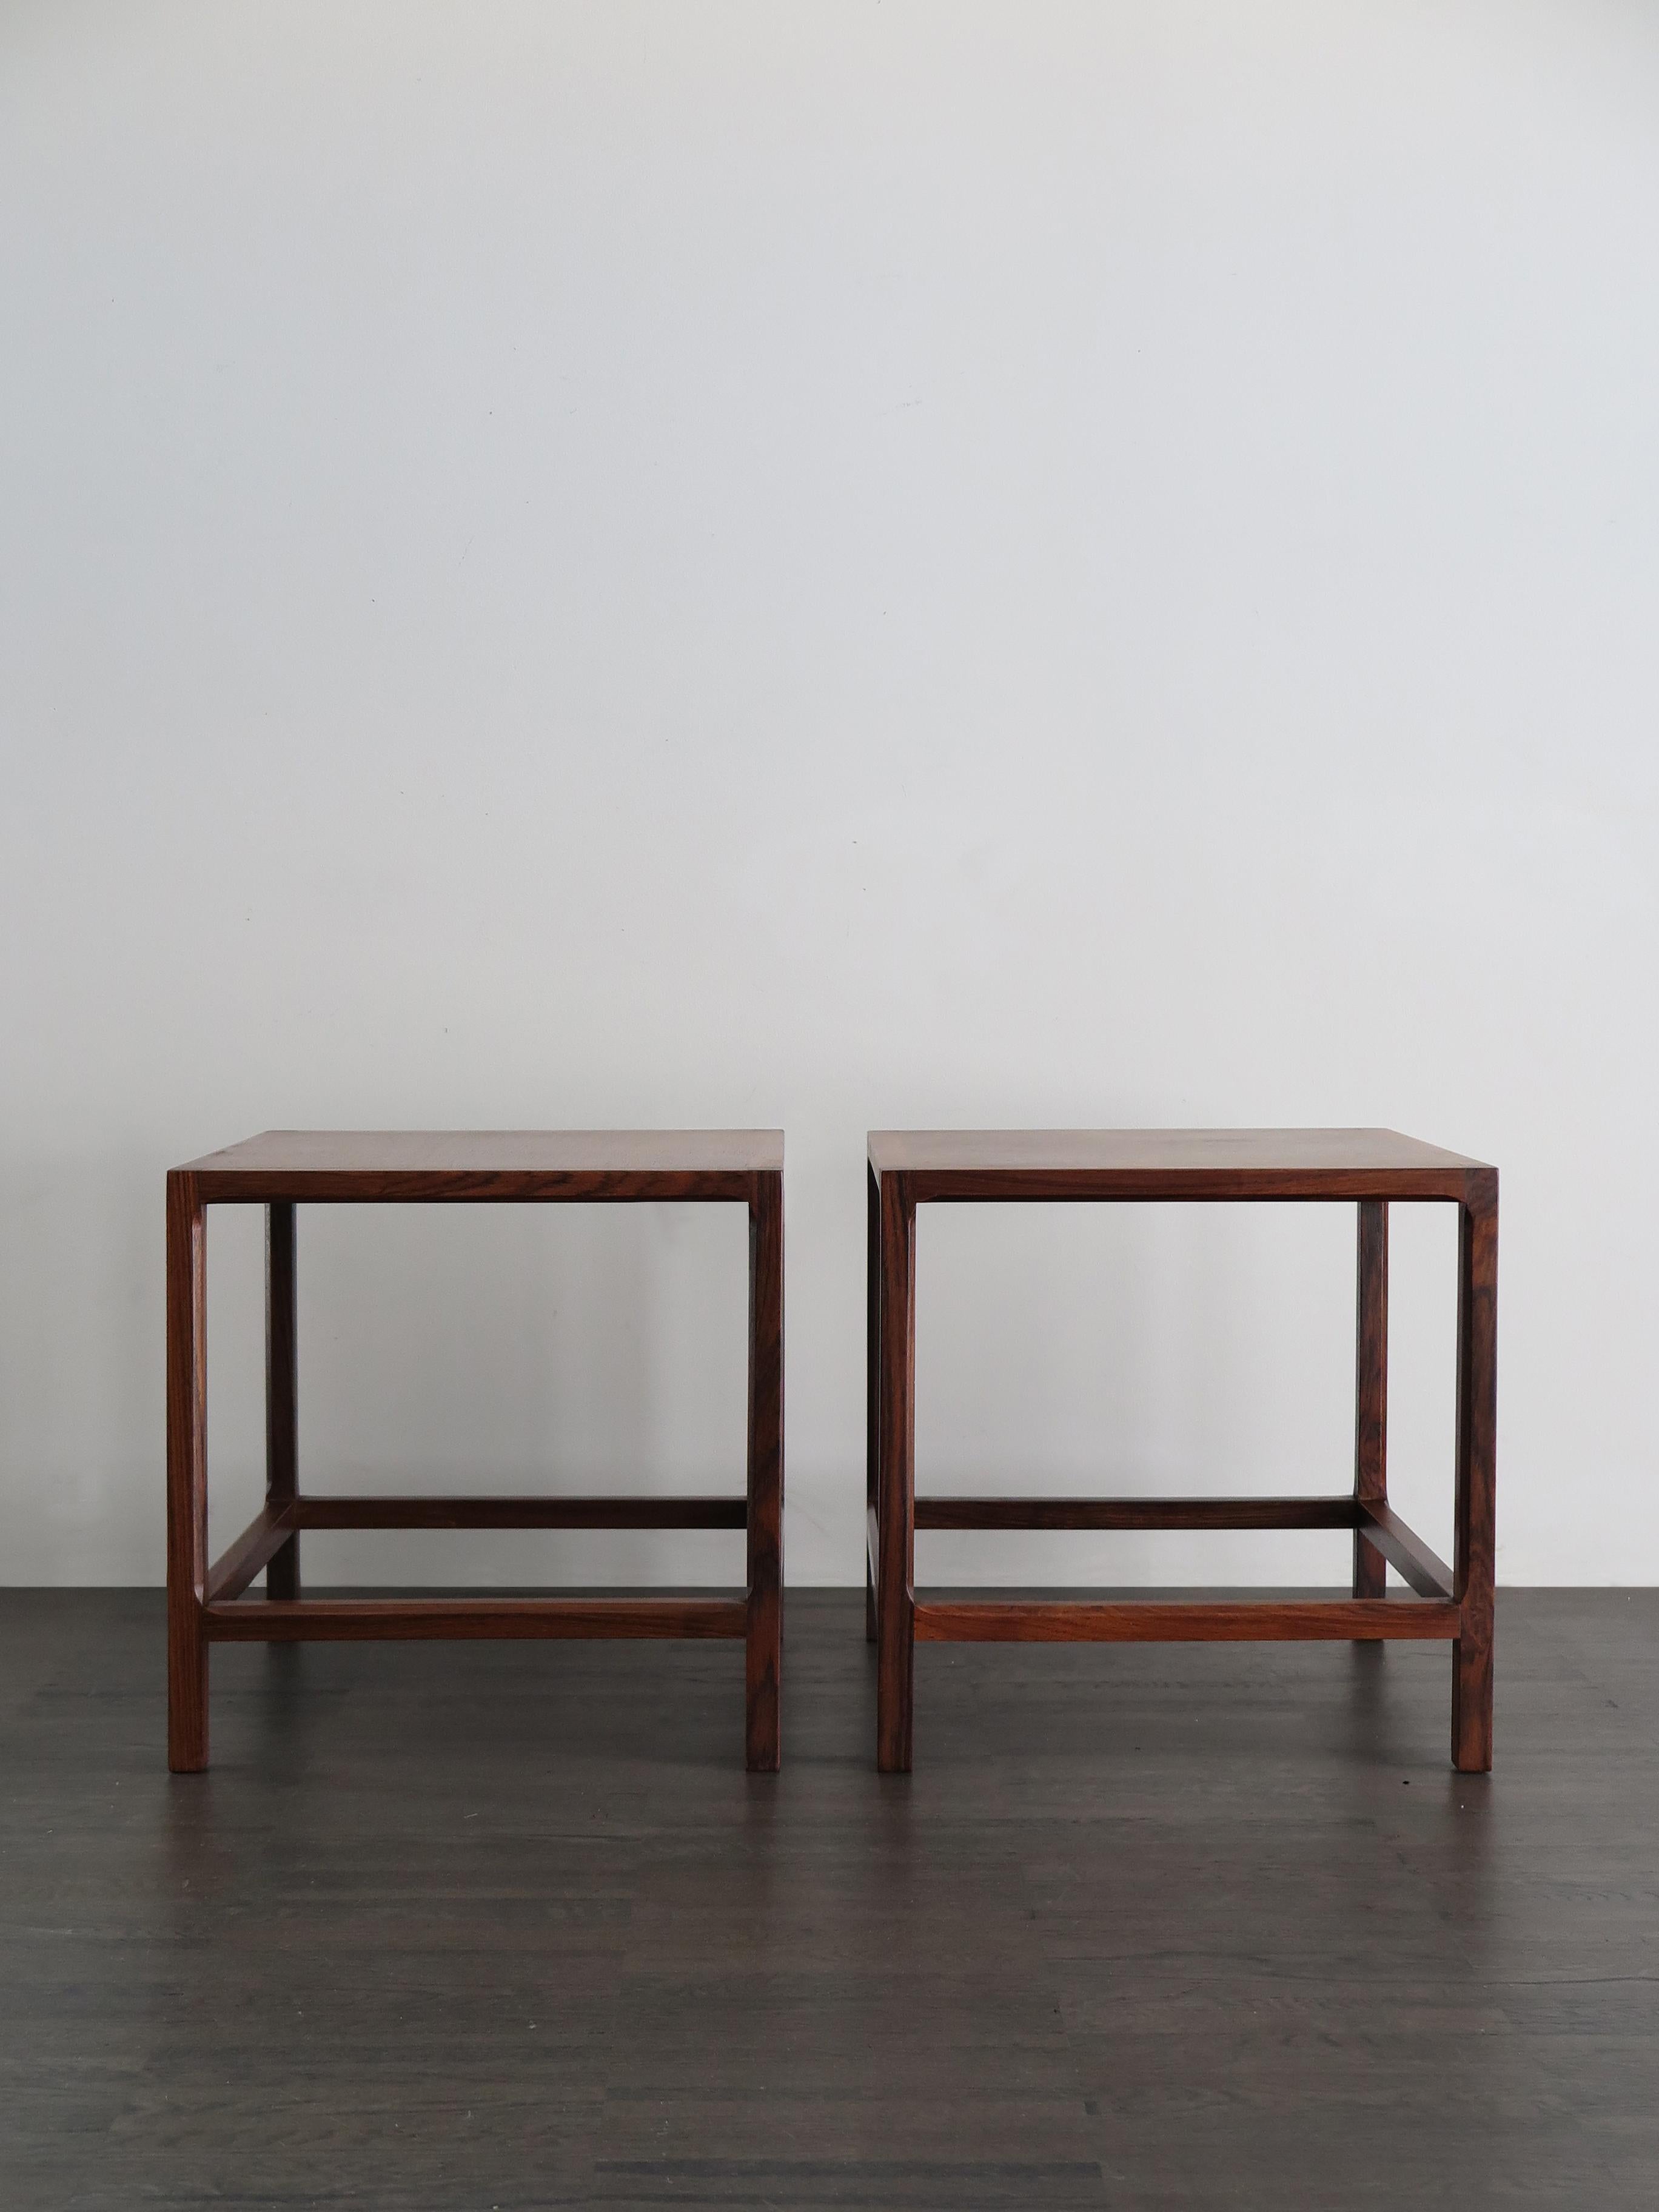 Scandinavian Mid-Century Modern design dark wood nightstands or coffee tables produced by Aksel Kjersgaar, Denmark, circa 1950.

Please note that the items are original of the period and this shows normal signs of age and use.